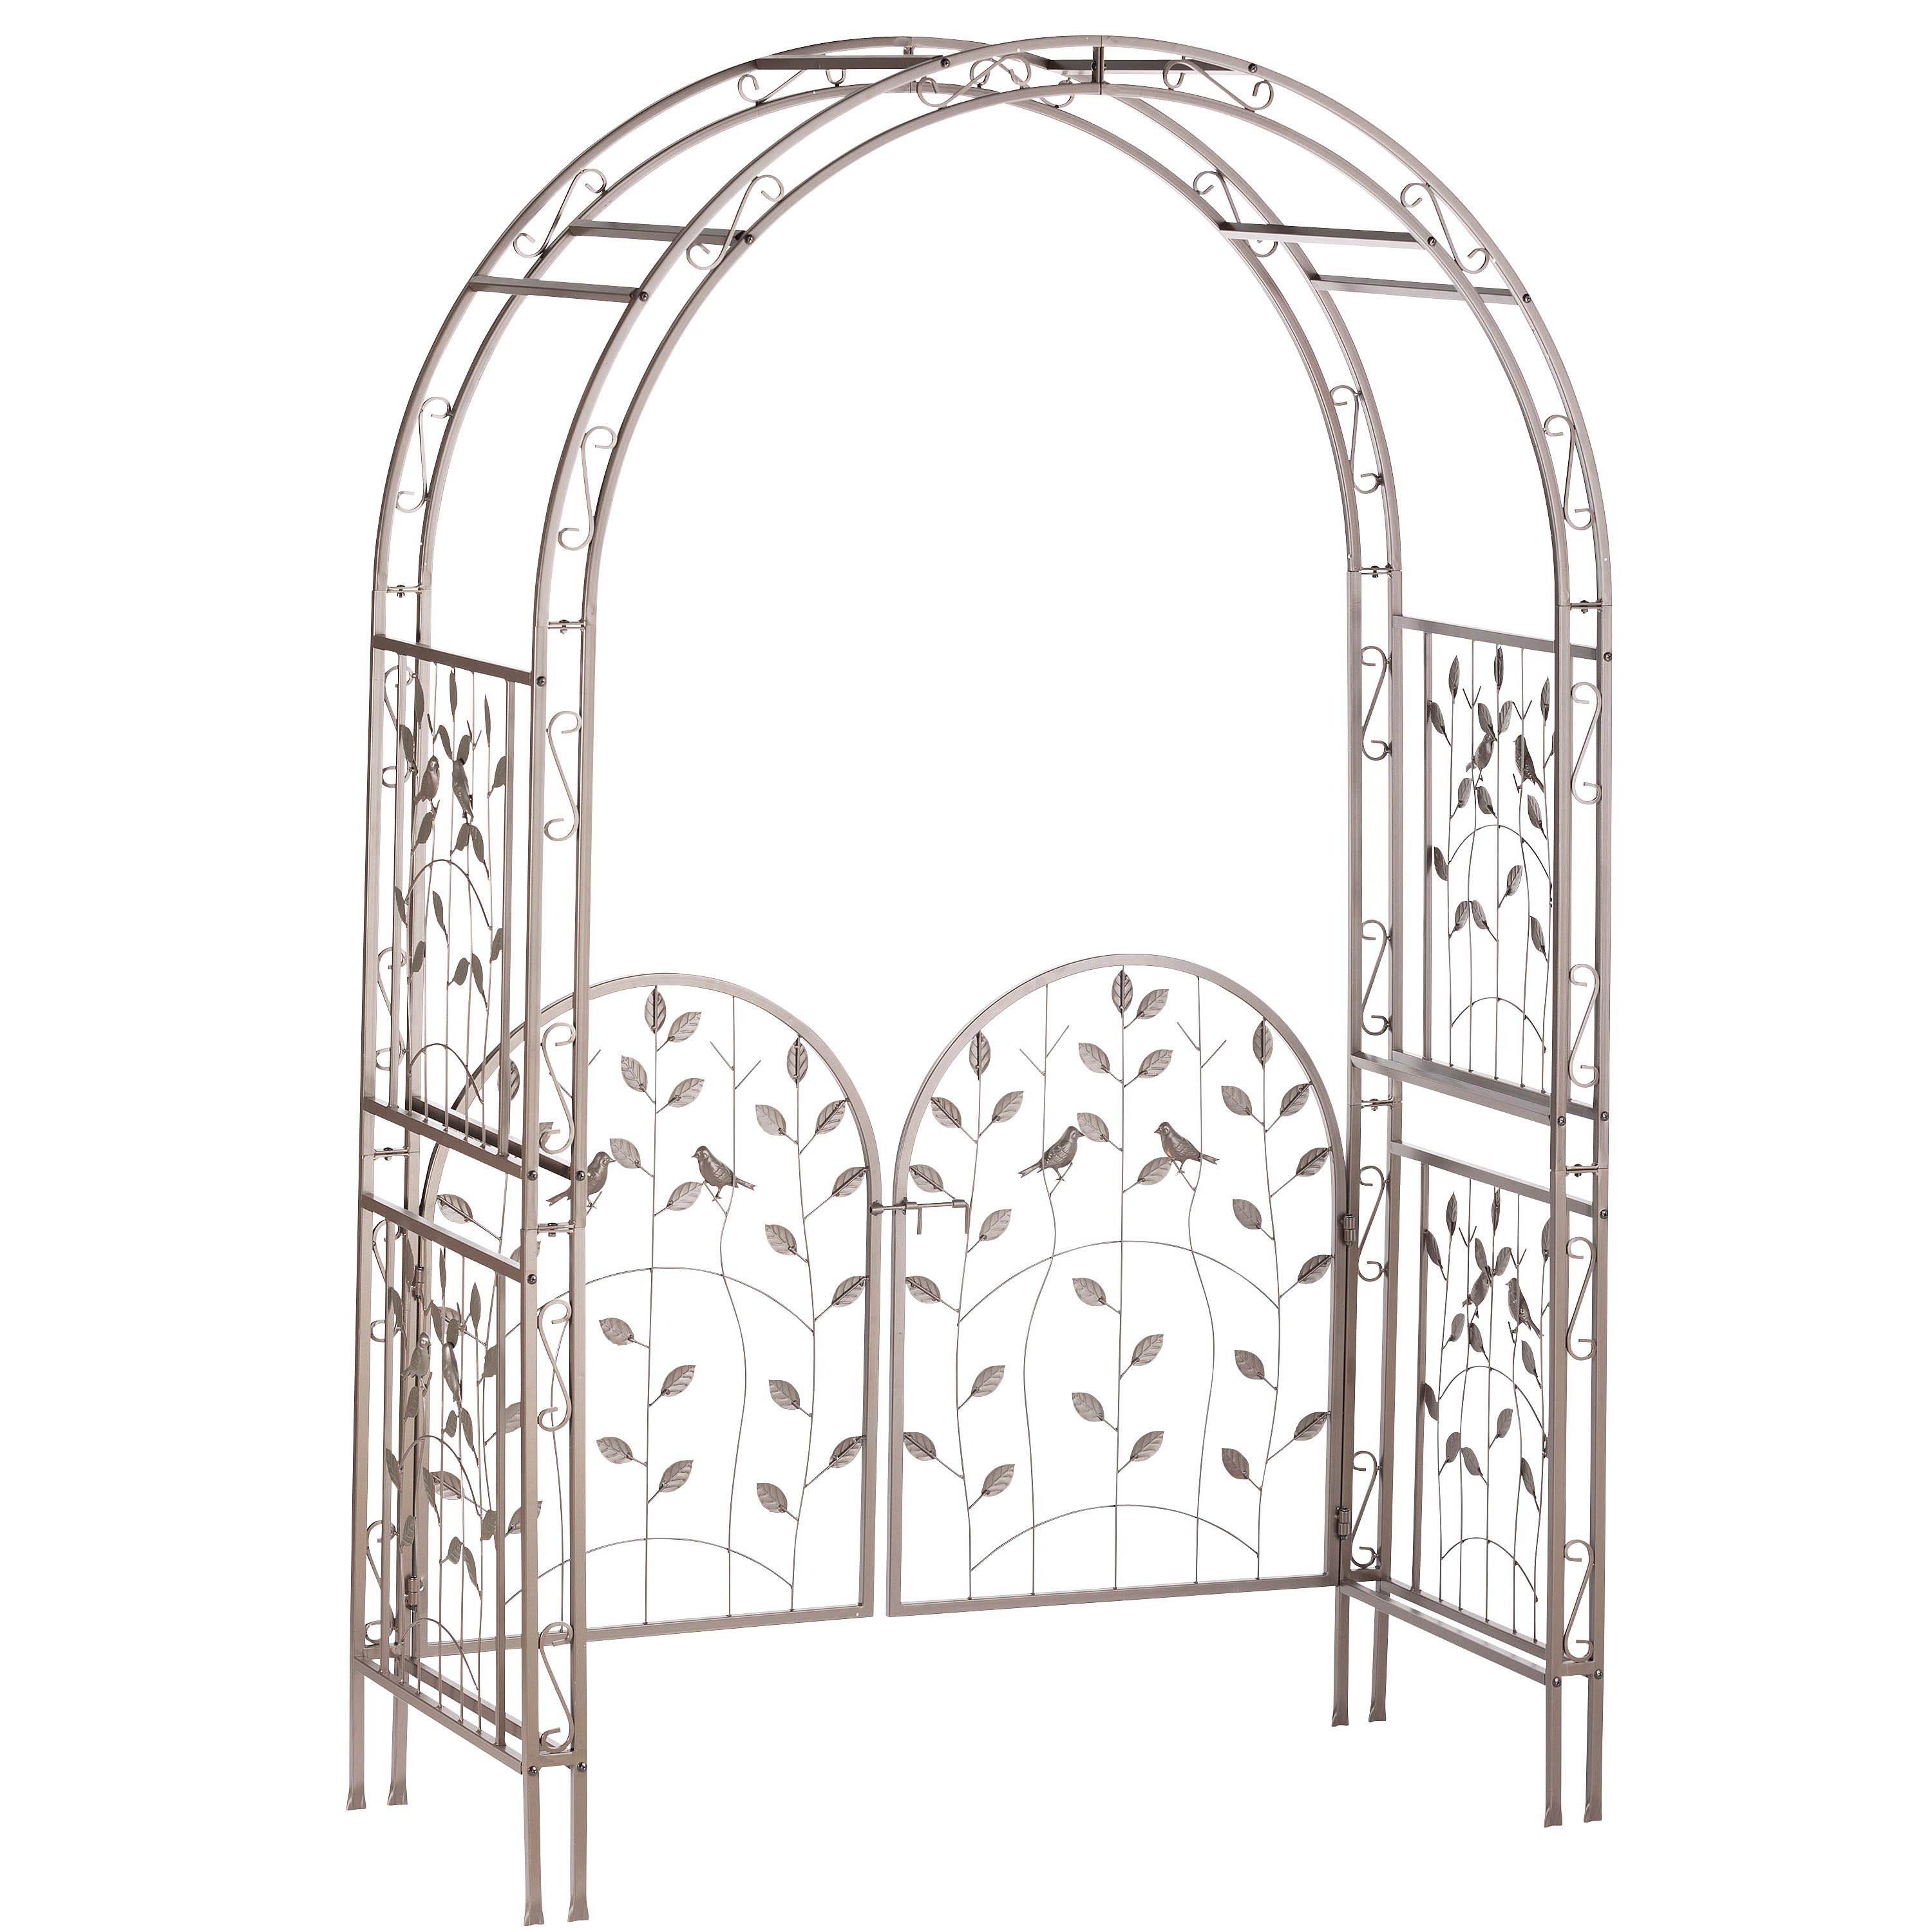 Metal Arched Birds and Leaves Garden Arbor with Gate | Plow & Hearth